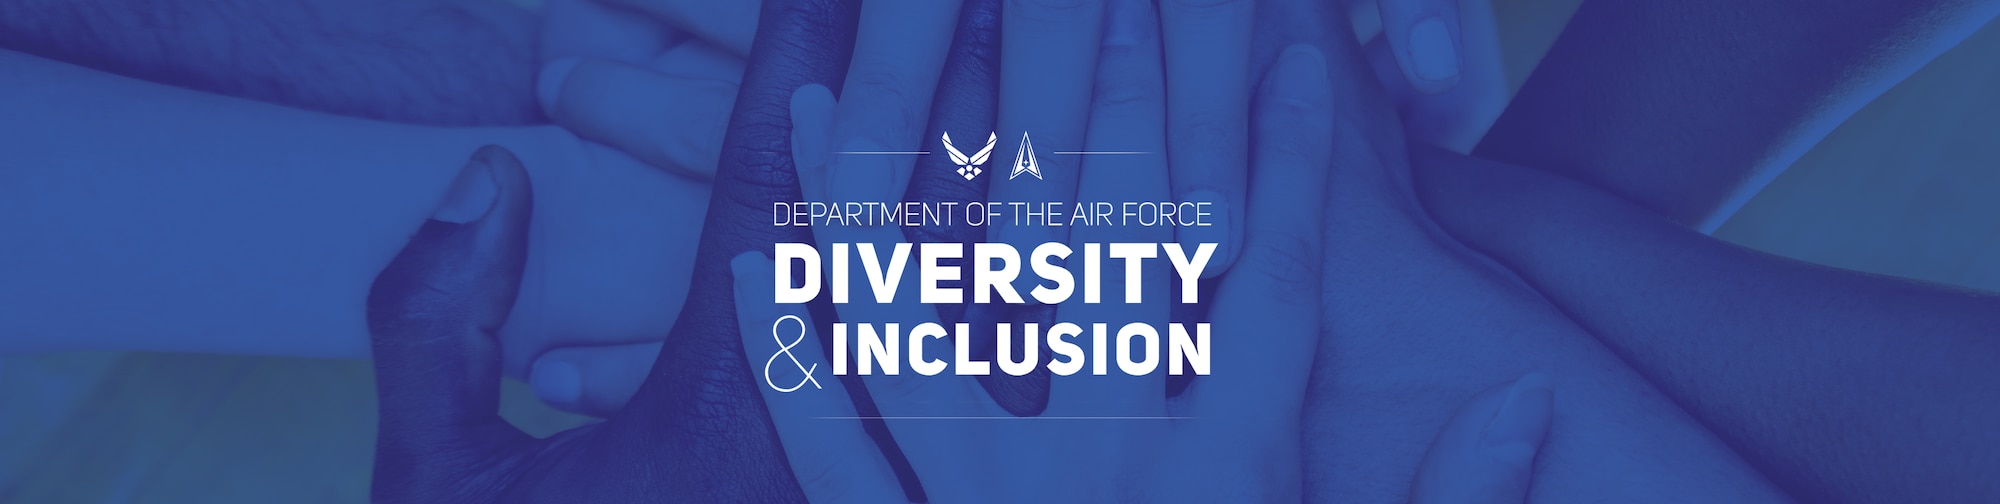 Department of the Air Force Diversity and Inclusion Graphic